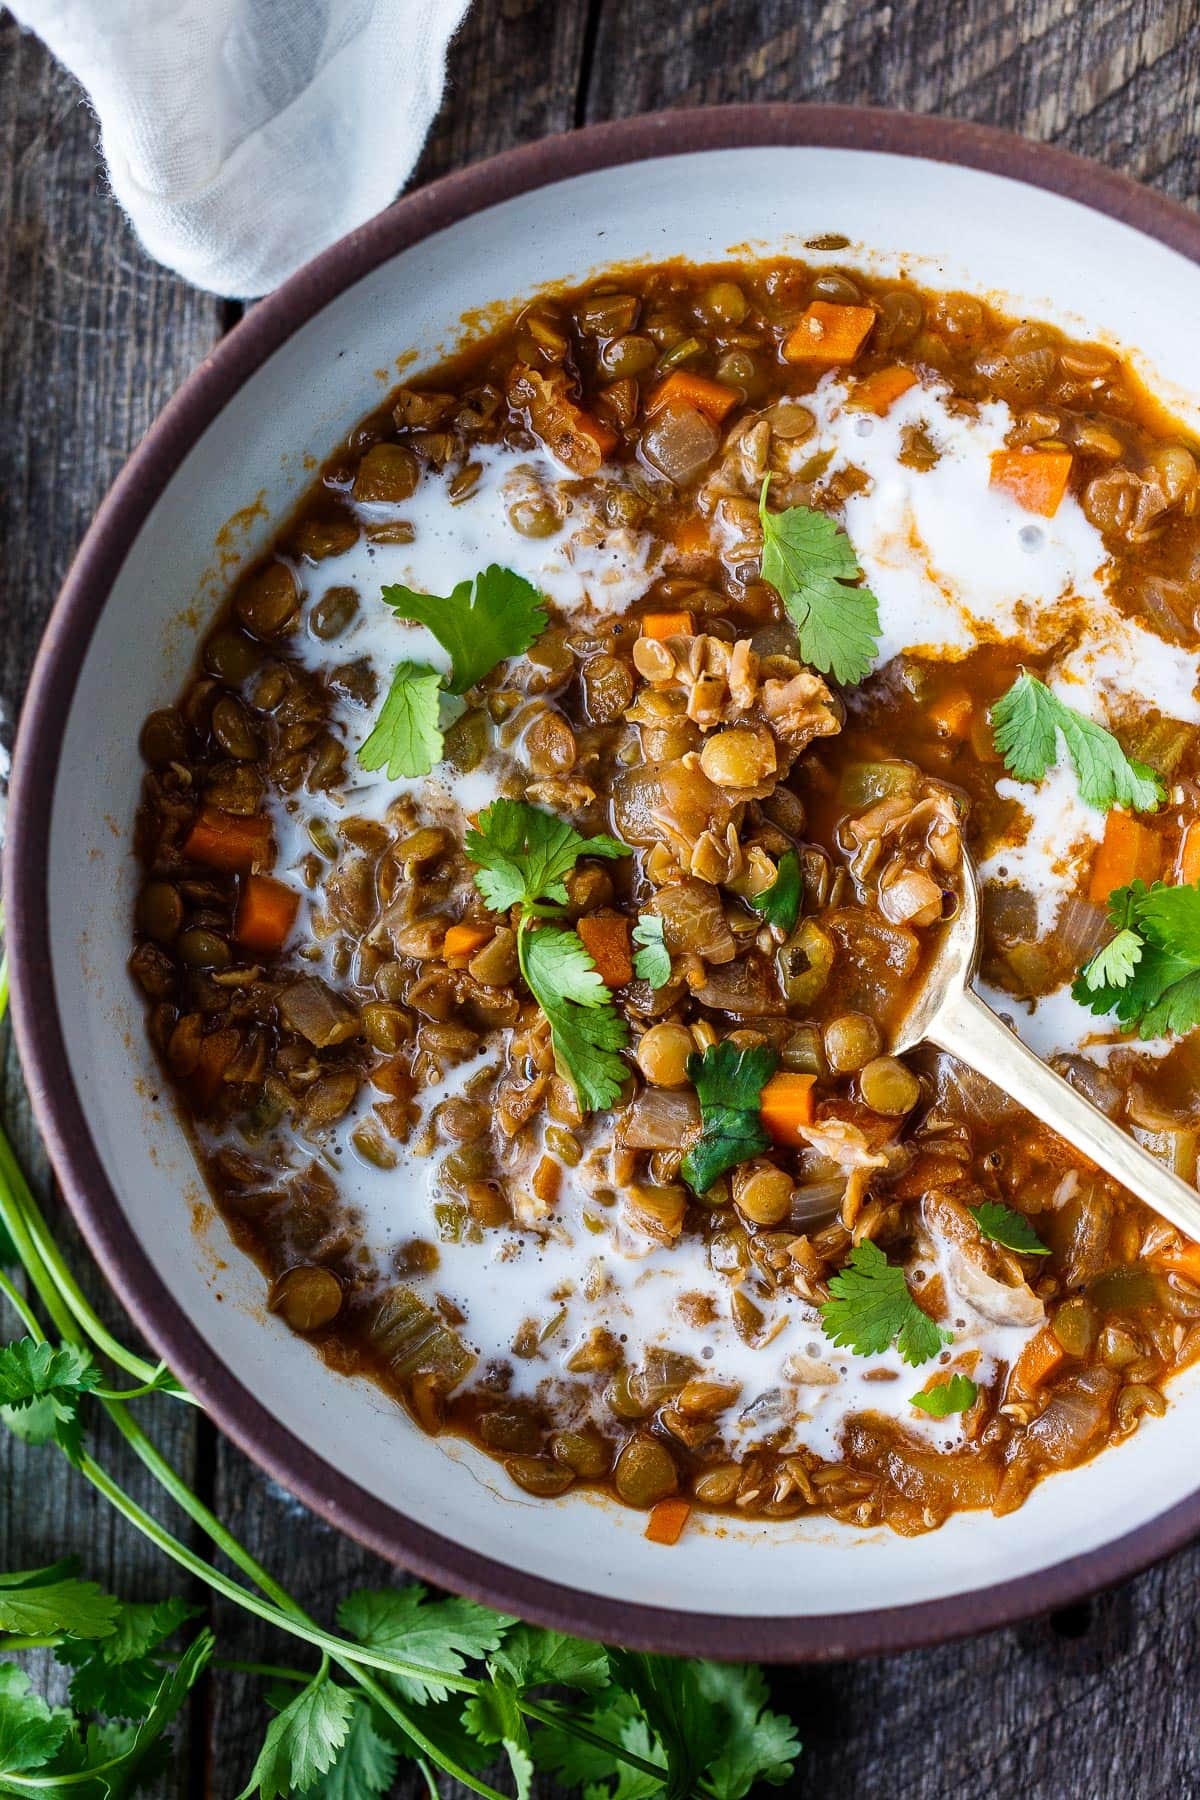 This Lentil Soup recipe is infused with Indian spices- nourishing, comforting and healthy, it's vegan, and one of our favorites! 